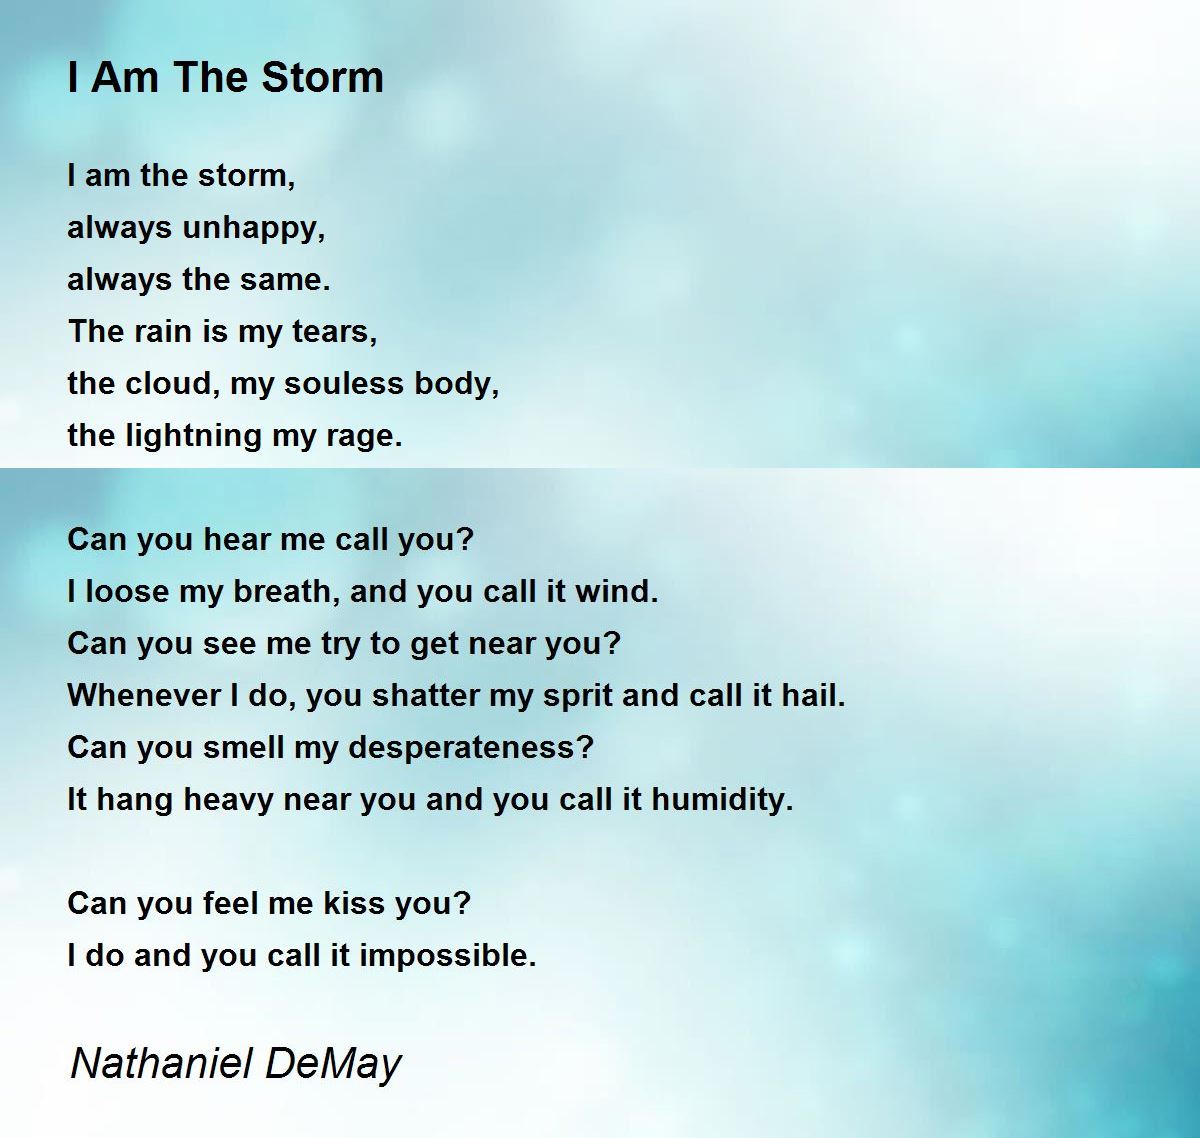 I Am The Storm - I Am The Storm Poem by Nathaniel DeMay